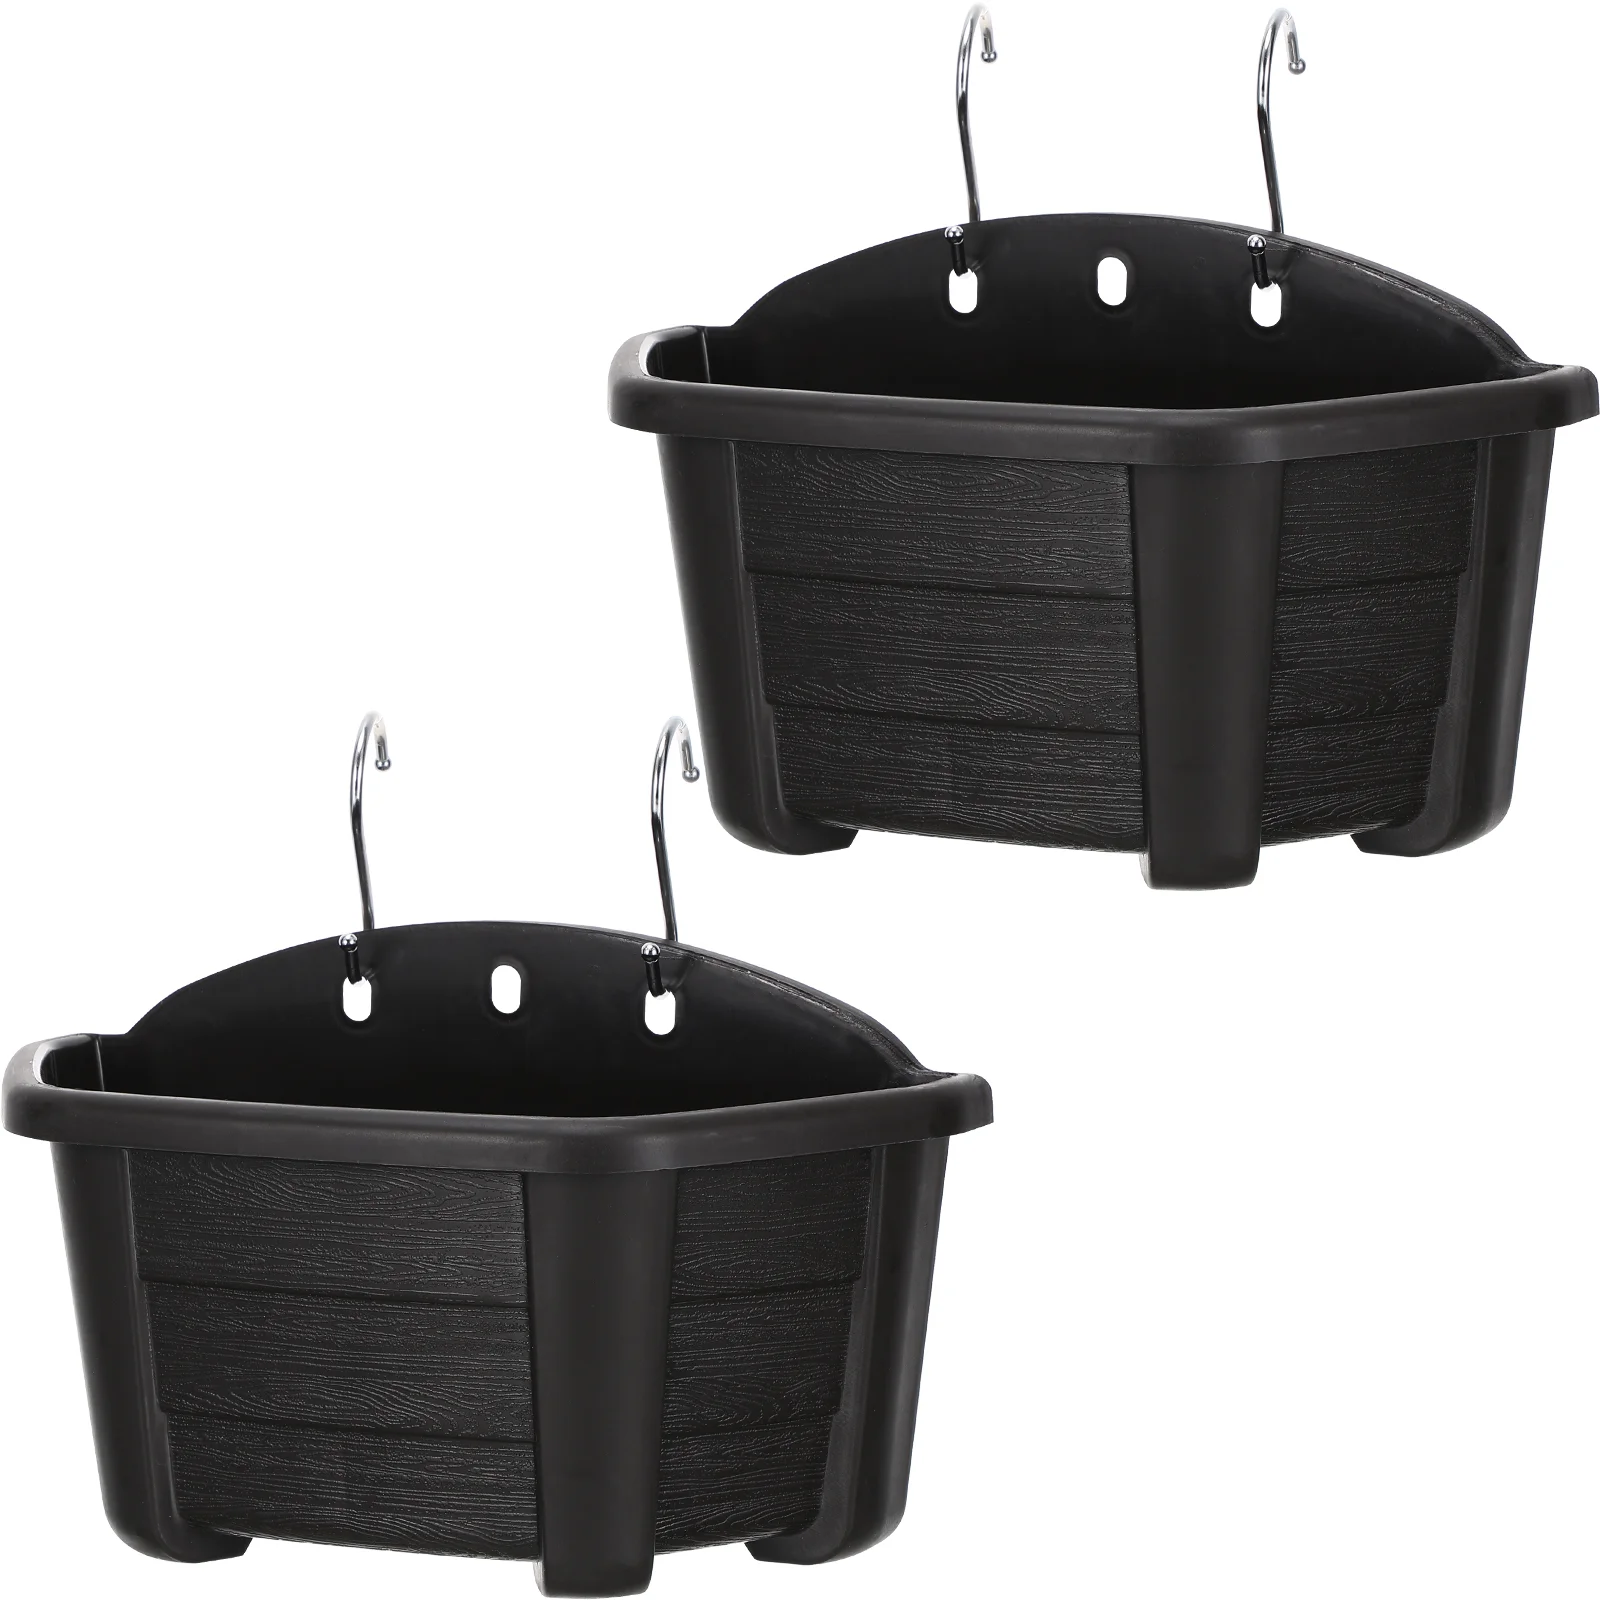 

Wall Hanging Flower Pots Semicircle Plastic Plant Baskets Flower Buckets With Hooks For Balcony Fence Indoor Outdoor Garden